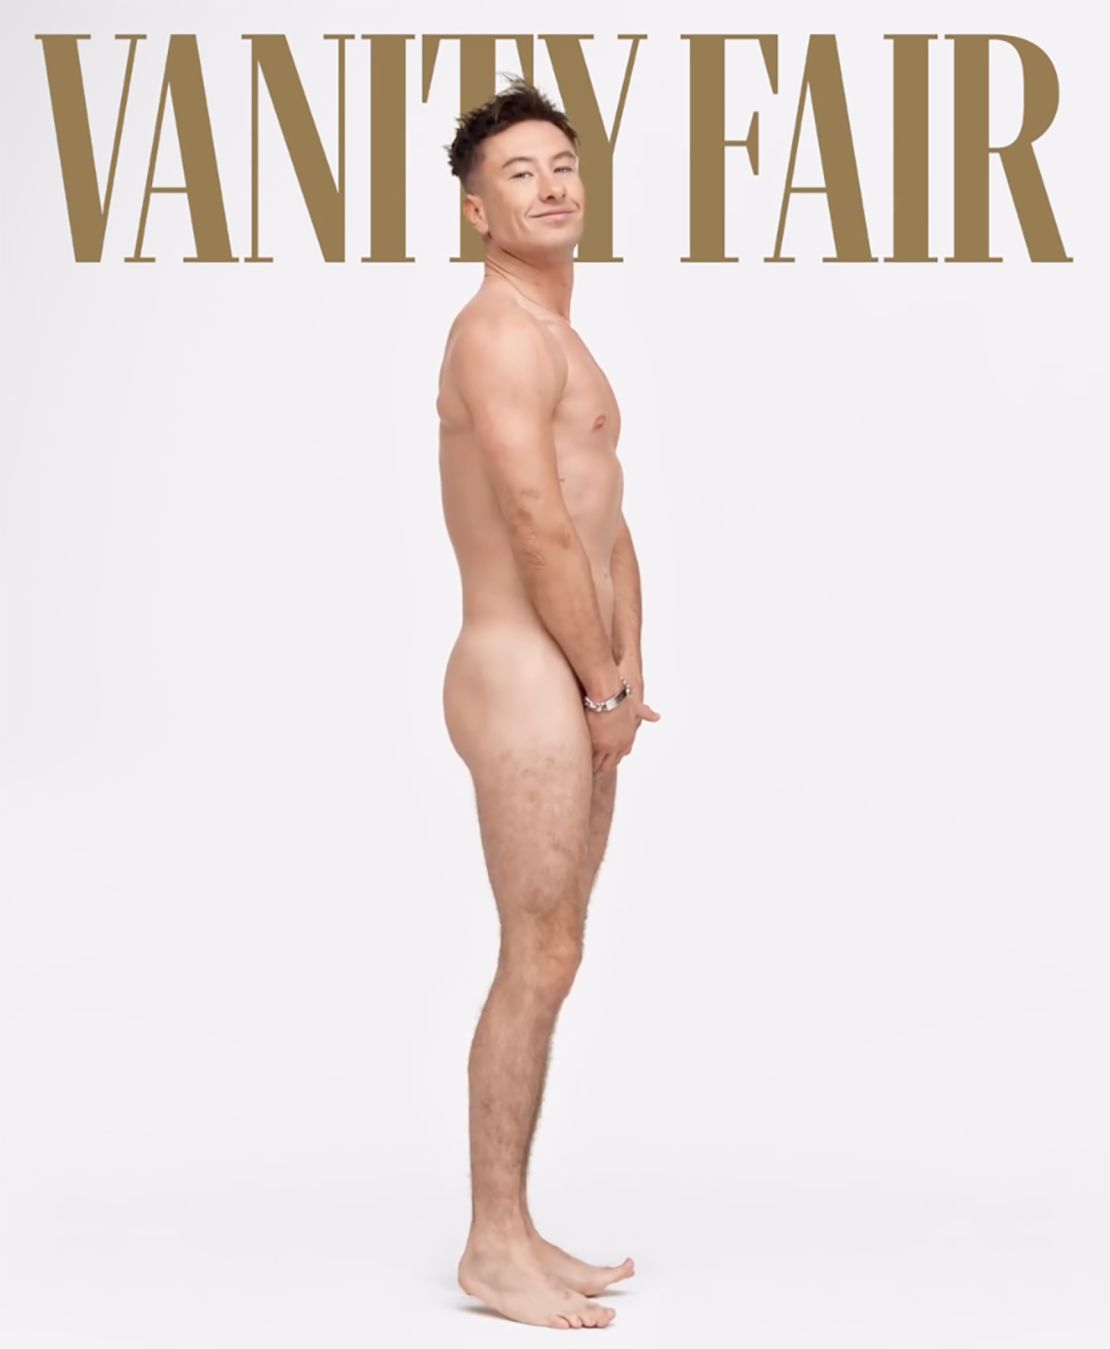 Barry Keoghan divided the internet when he posed naked for Vanity Fair on Wednesday in a nod to his latest film, "Saltburn."